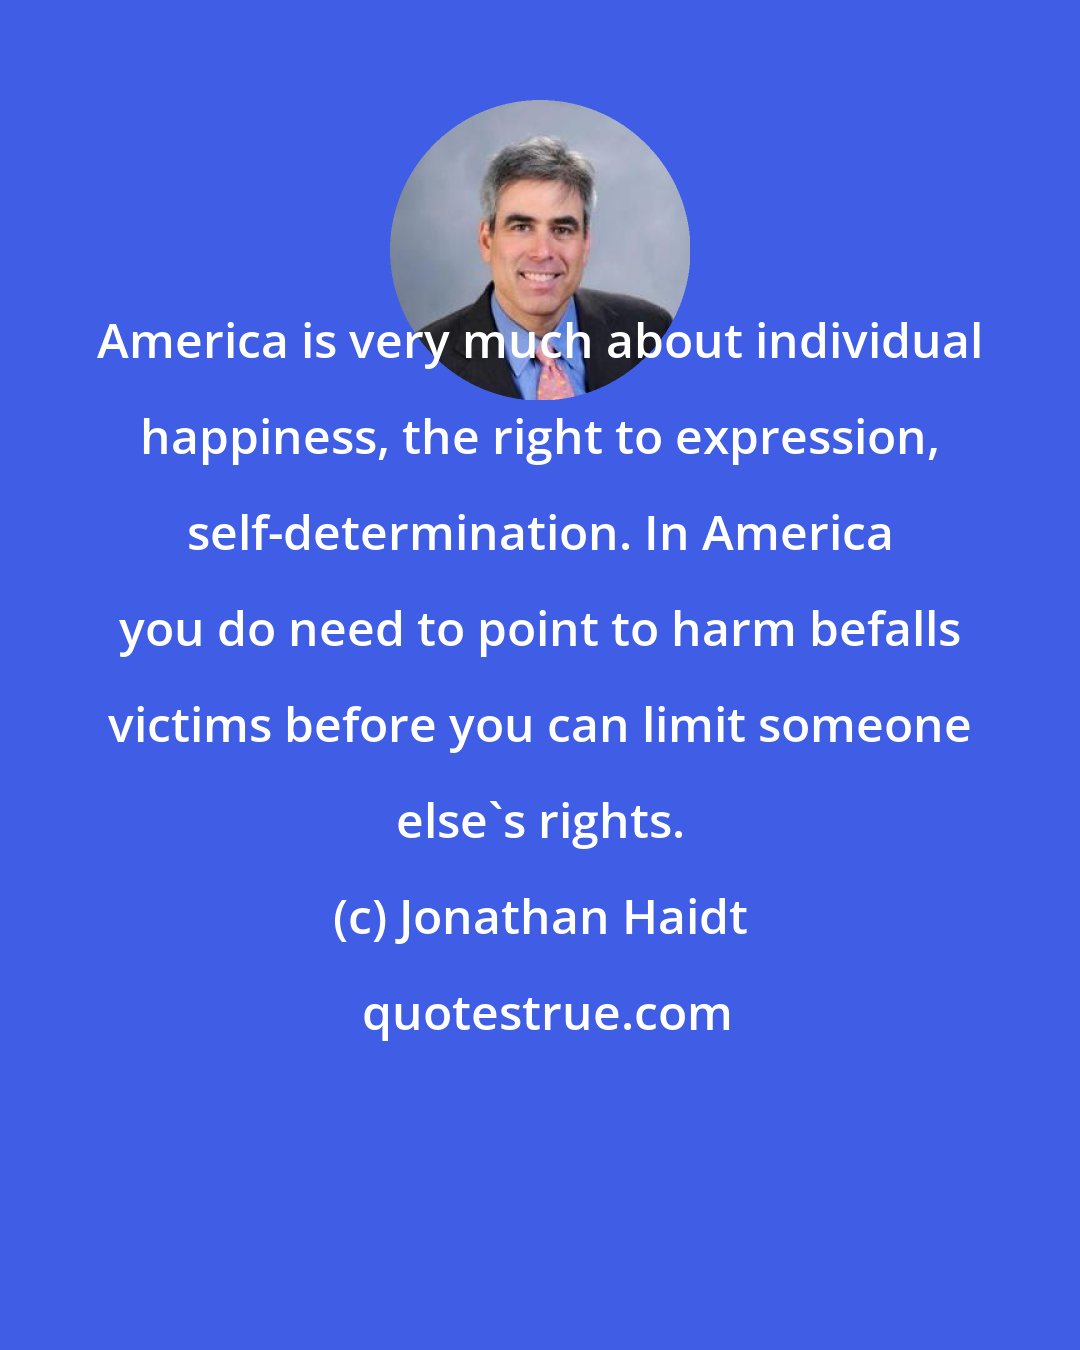 Jonathan Haidt: America is very much about individual happiness, the right to expression, self-determination. In America you do need to point to harm befalls victims before you can limit someone else's rights.